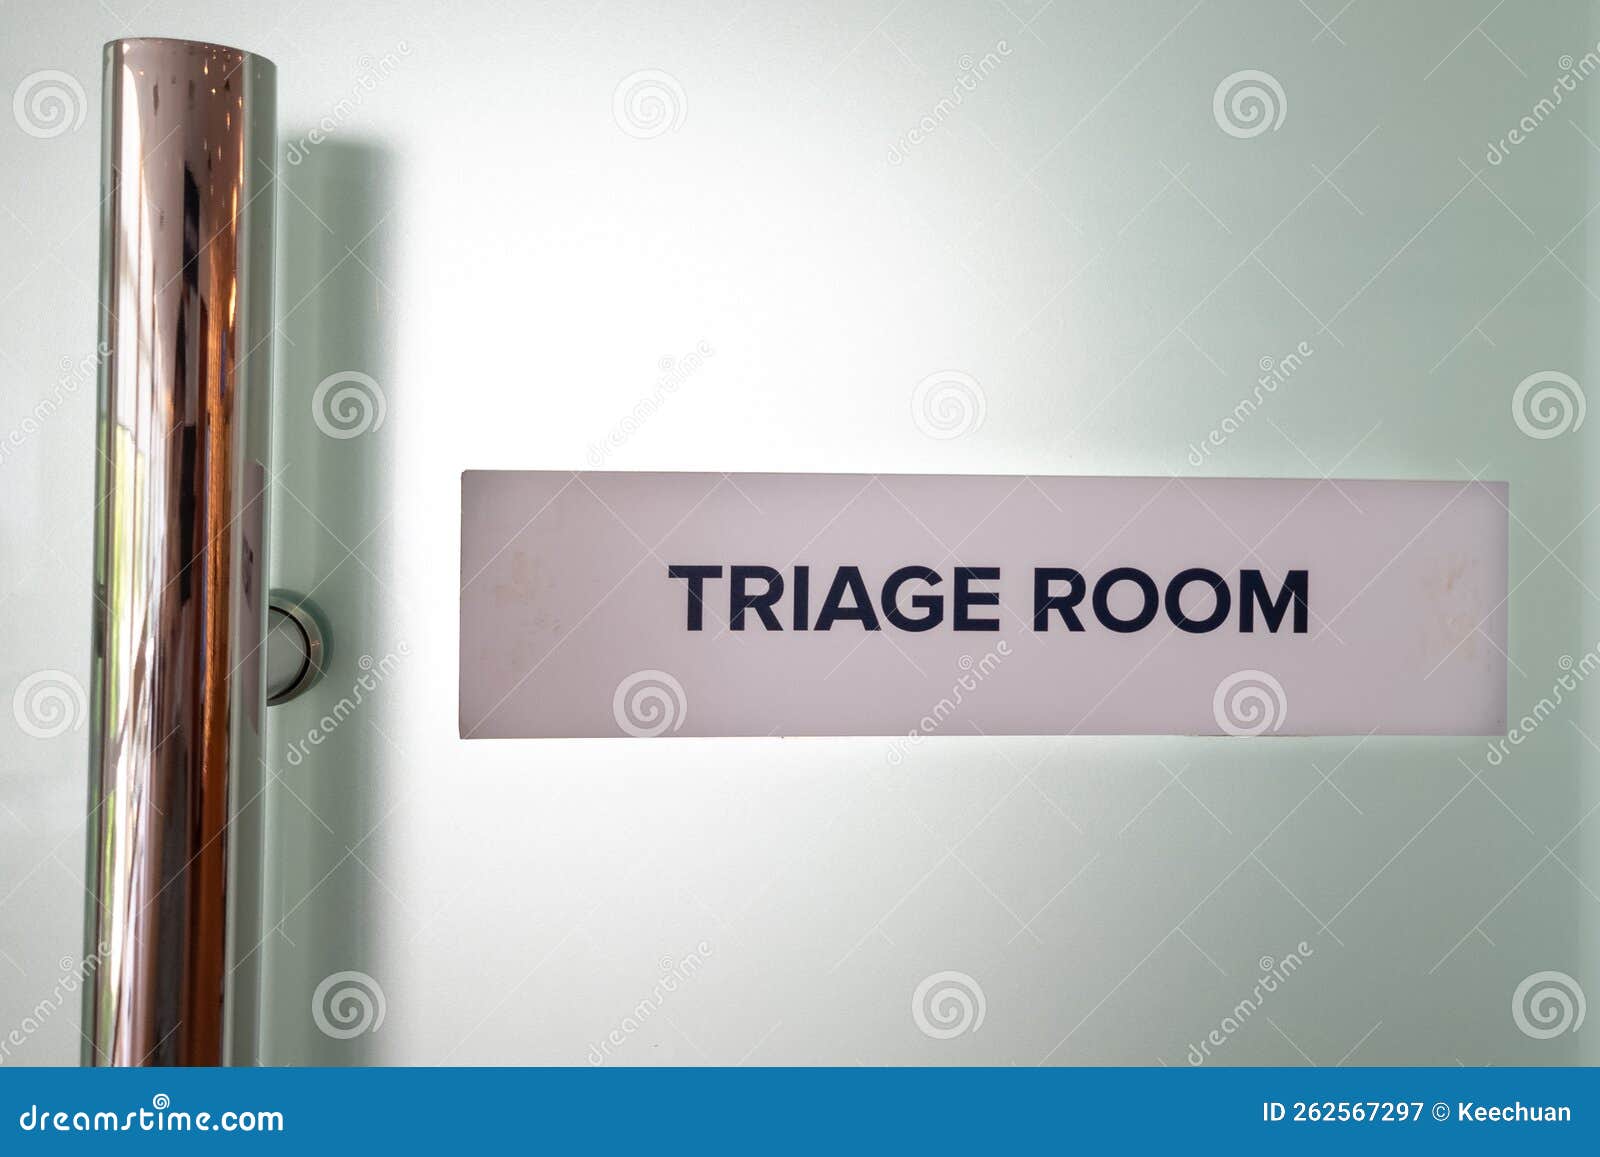 concept of the word triage room at the emergency entrance of hospital